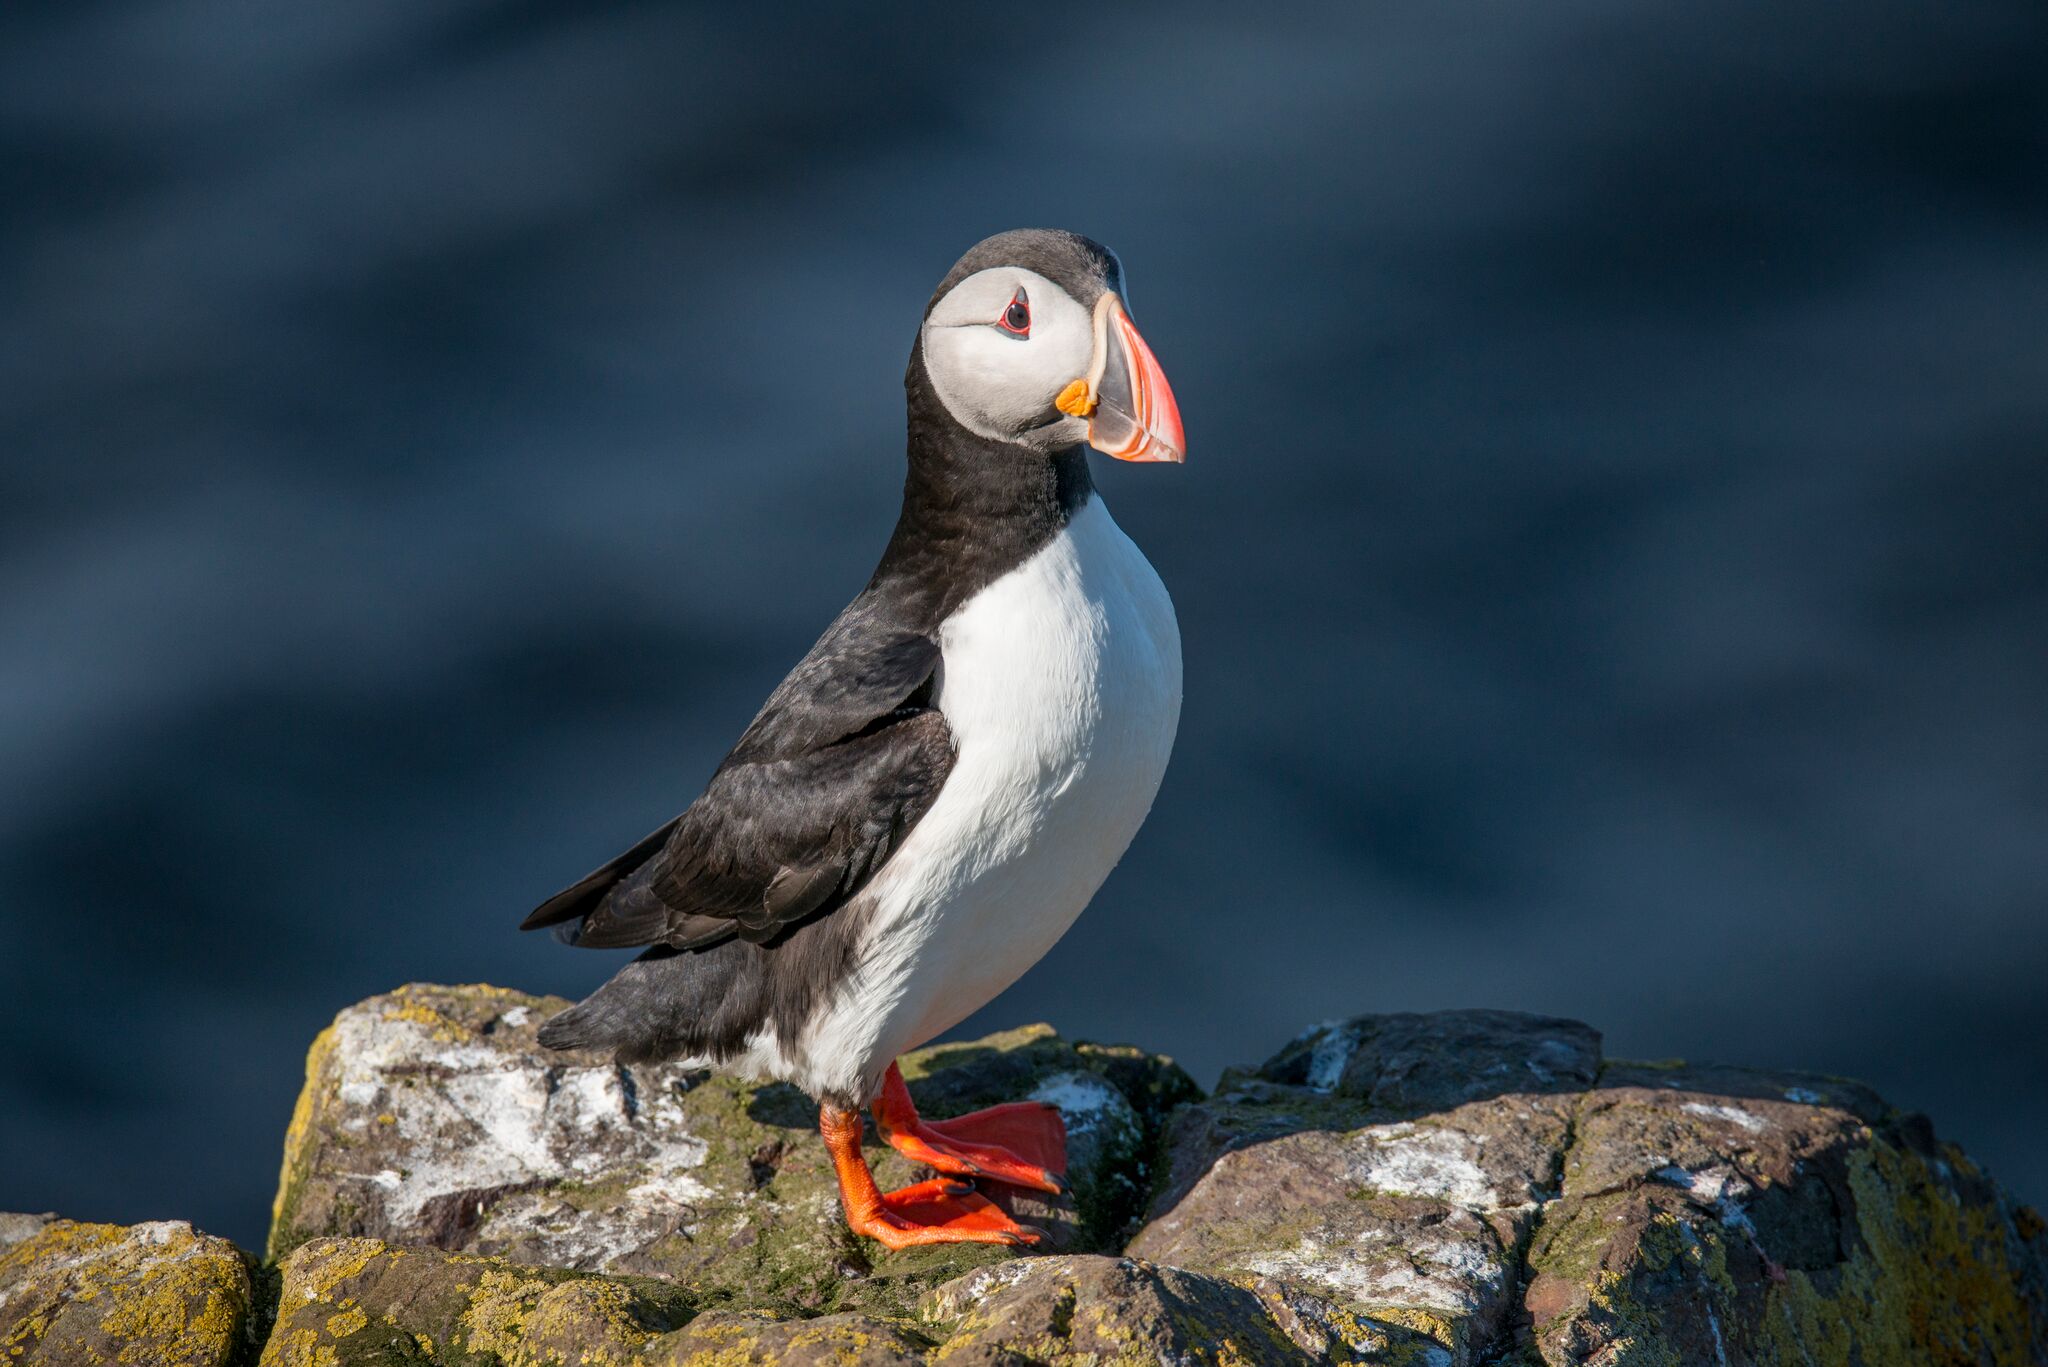 A puffin in the sun, scouting for food.